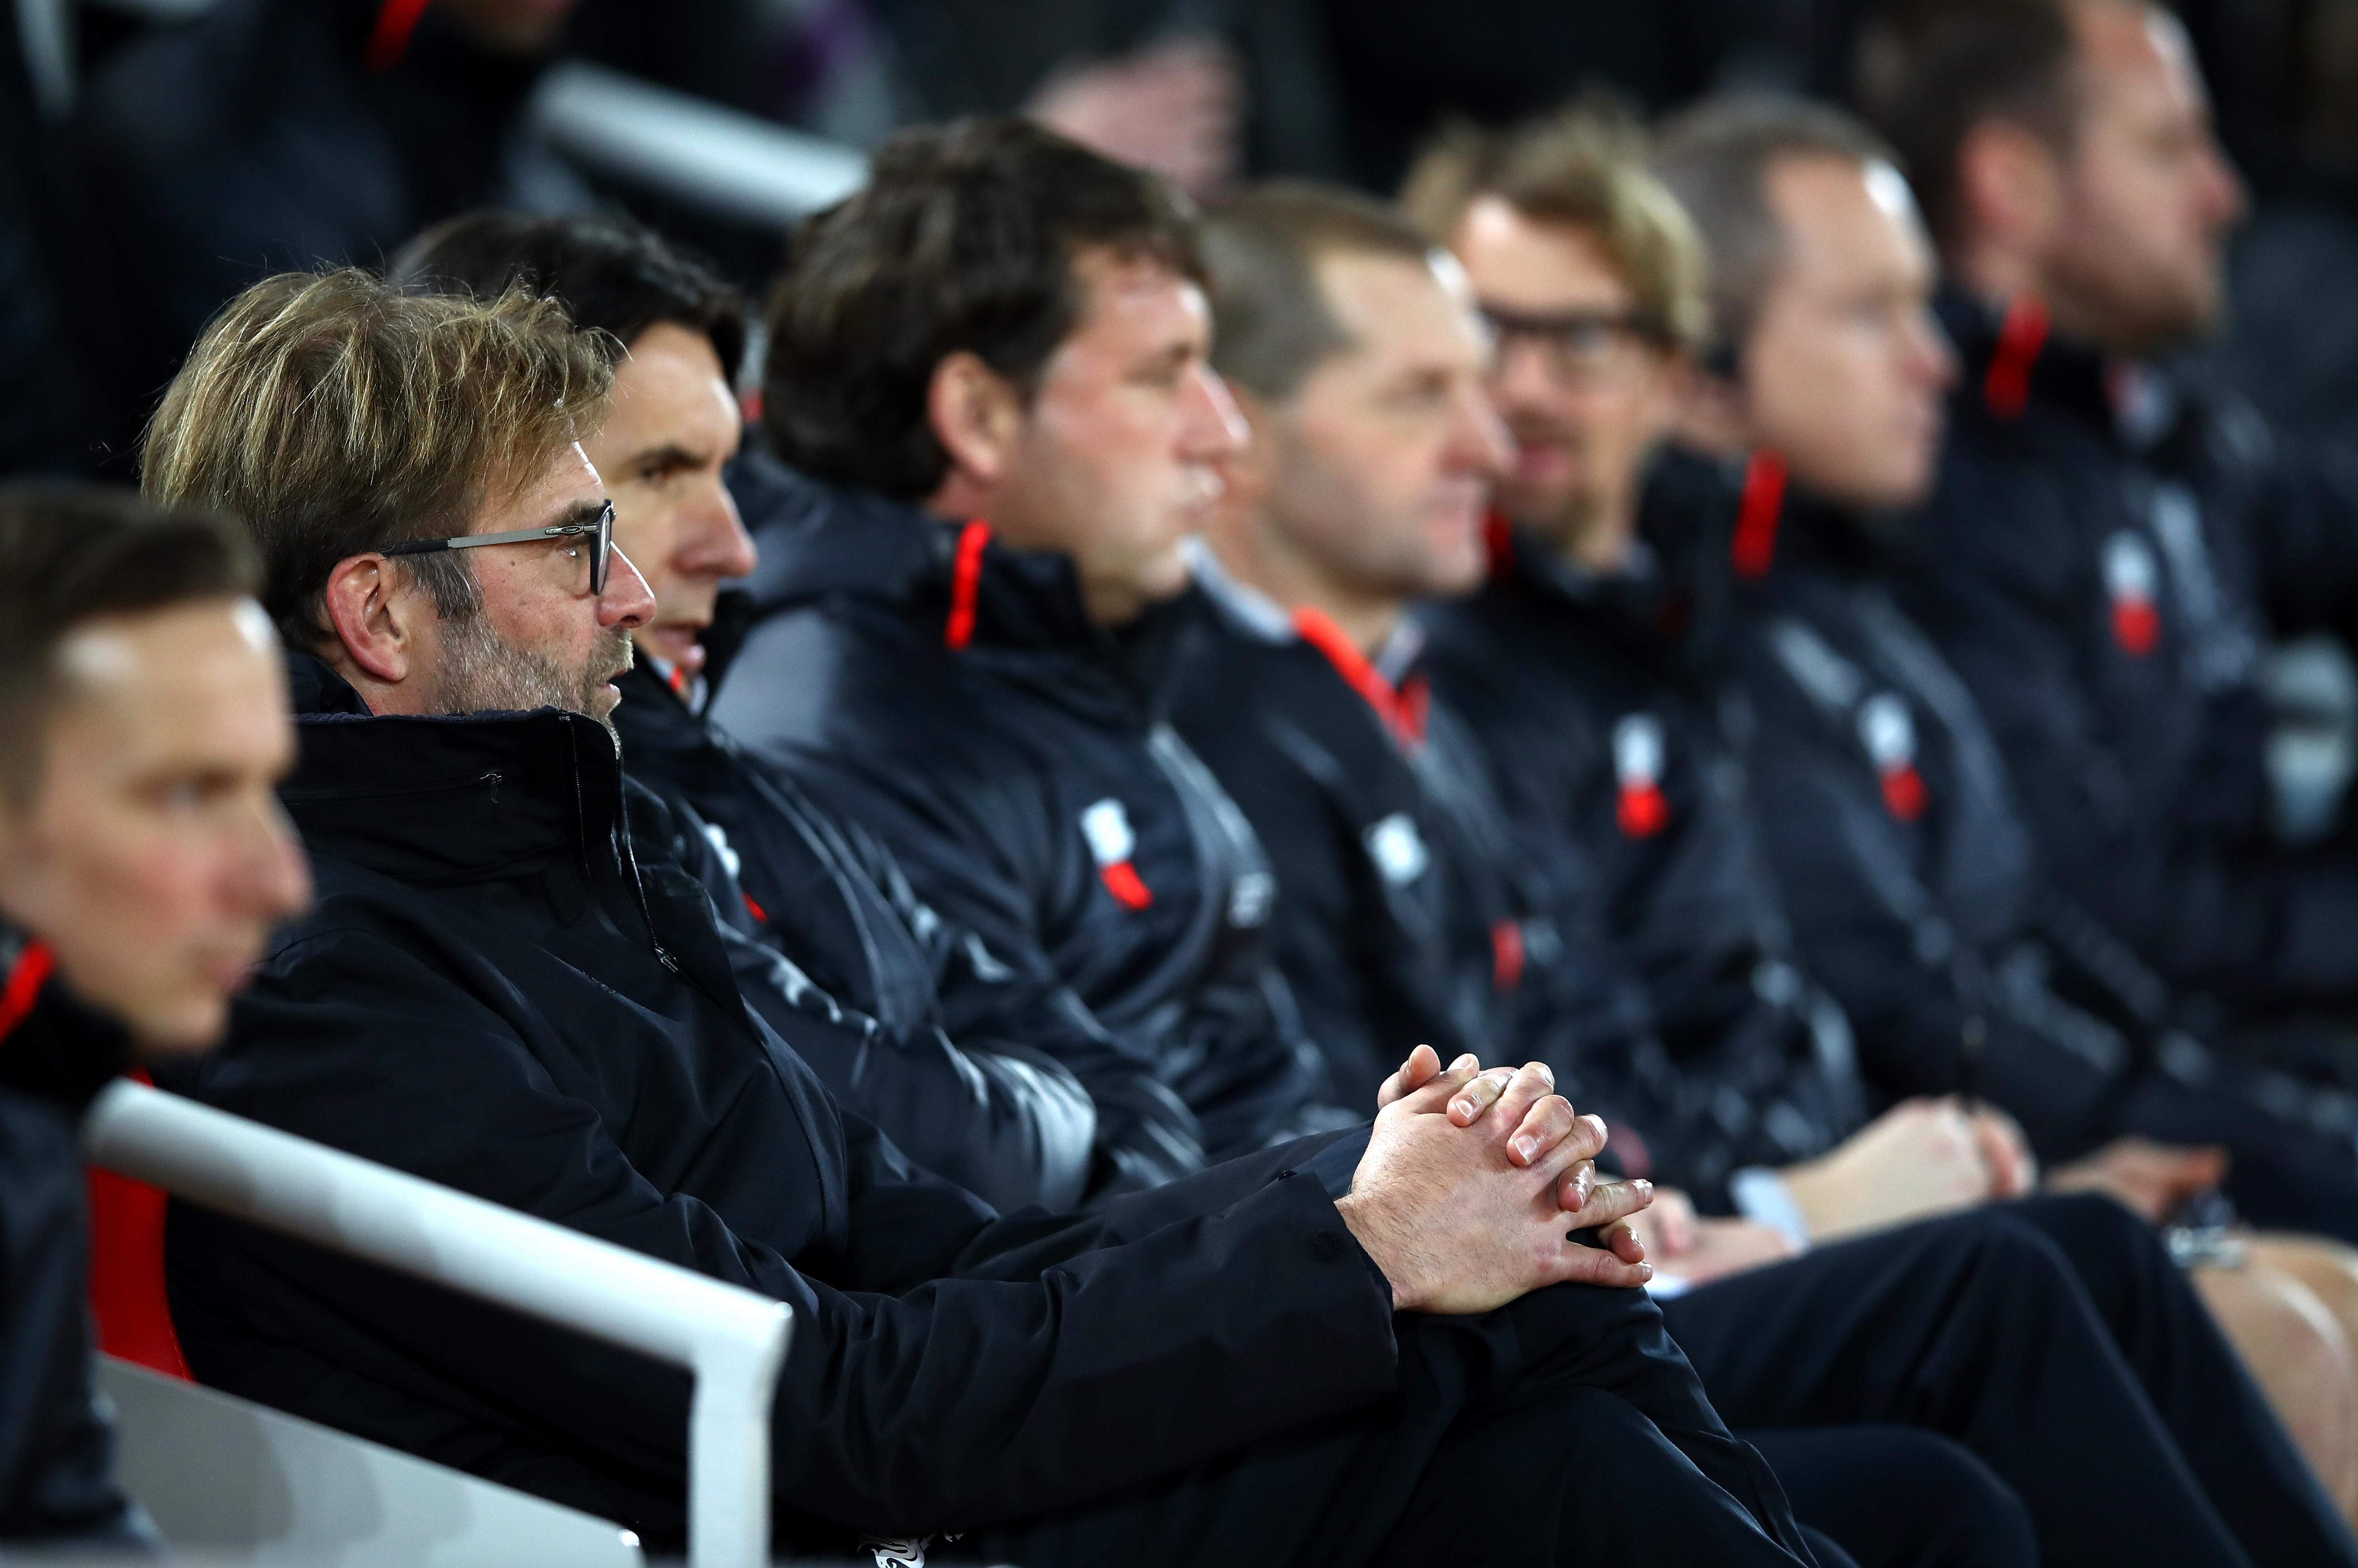 LIVERPOOL, ENGLAND - DECEMBER 31: Jurgen Klopp, Manager of Liverpool looks on during the Premier League match between Liverpool and Manchester City at Anfield on December 31, 2016 in Liverpool, England.  (Photo by Clive Brunskill/Getty Images)